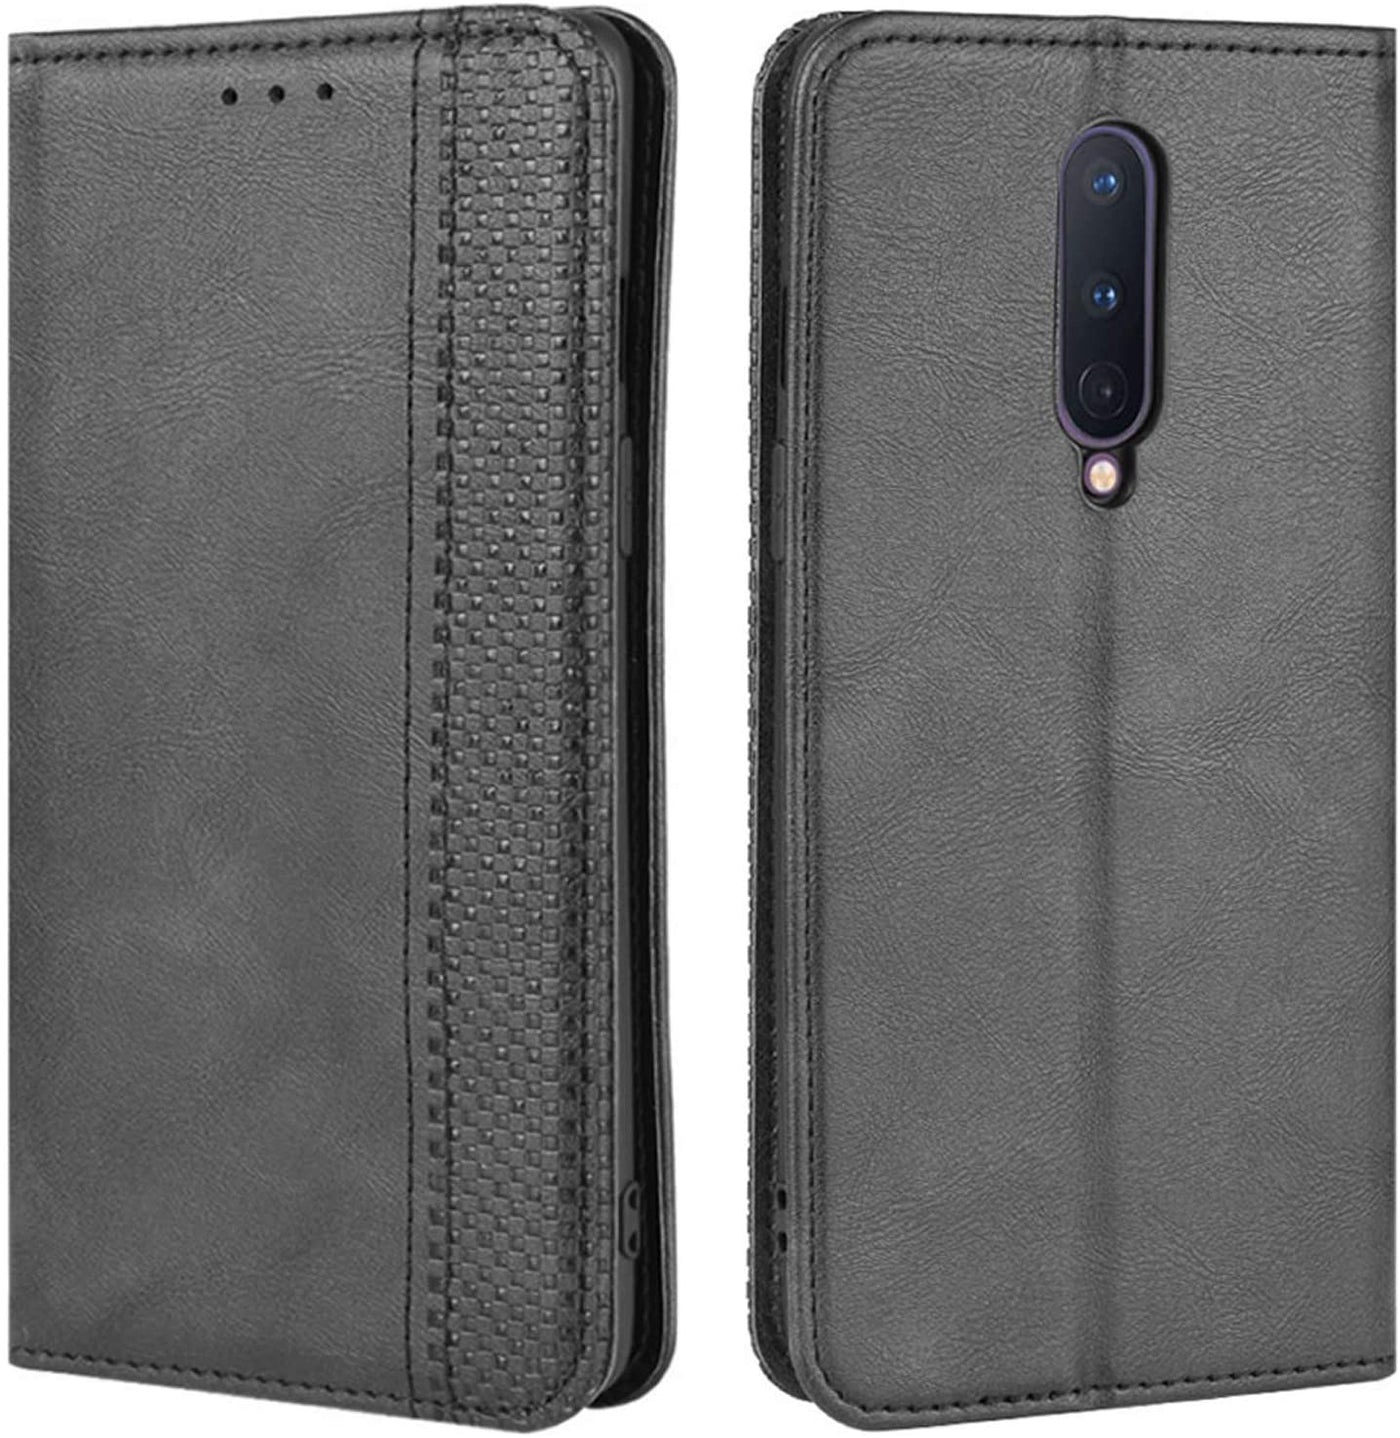 Oneplus 8 black color leather wallet flip cover case By excelsior